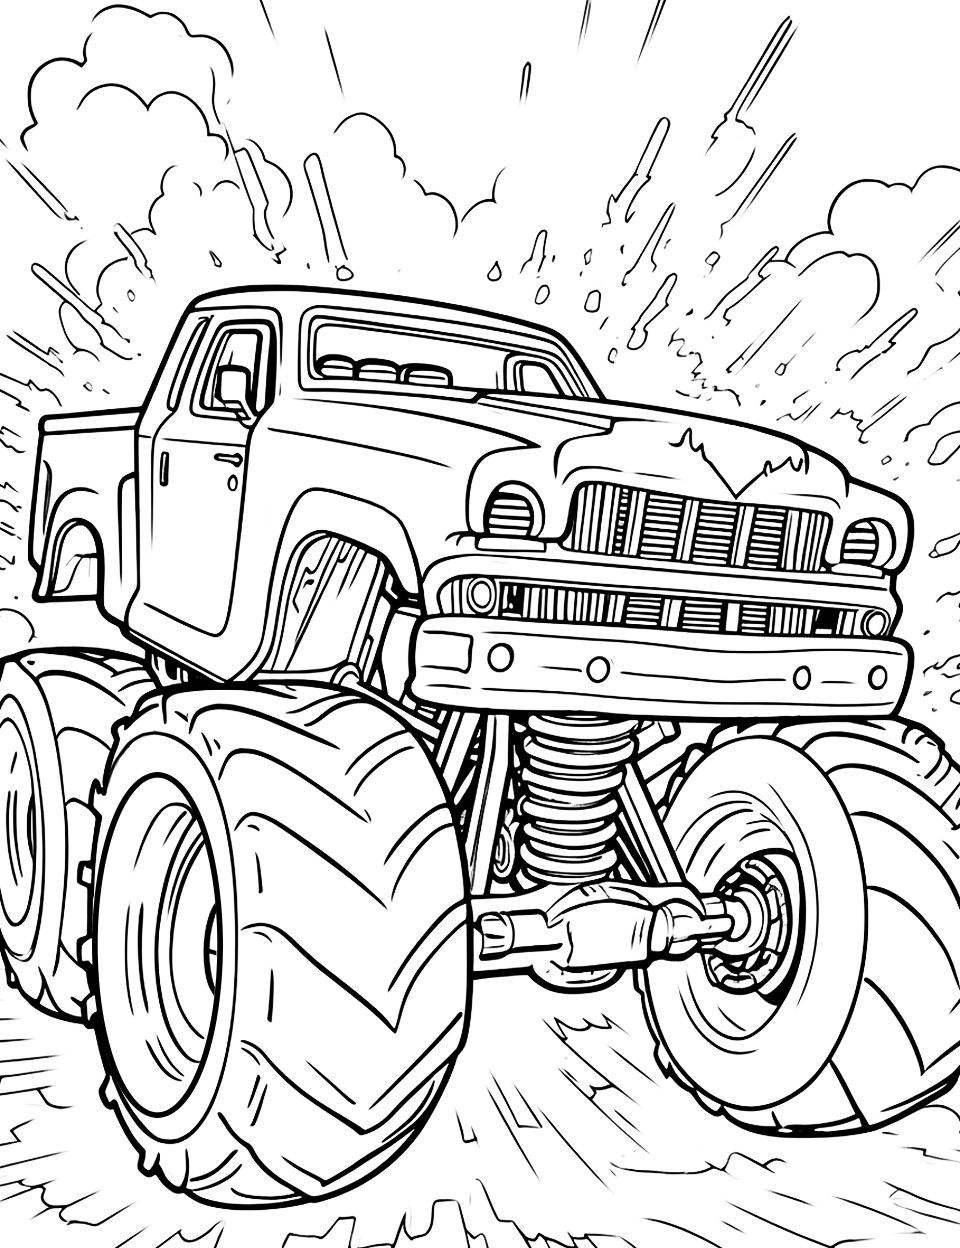 Hot Wheels Monster Truck Coloring Page - A detailed monster truck zooming through a field.